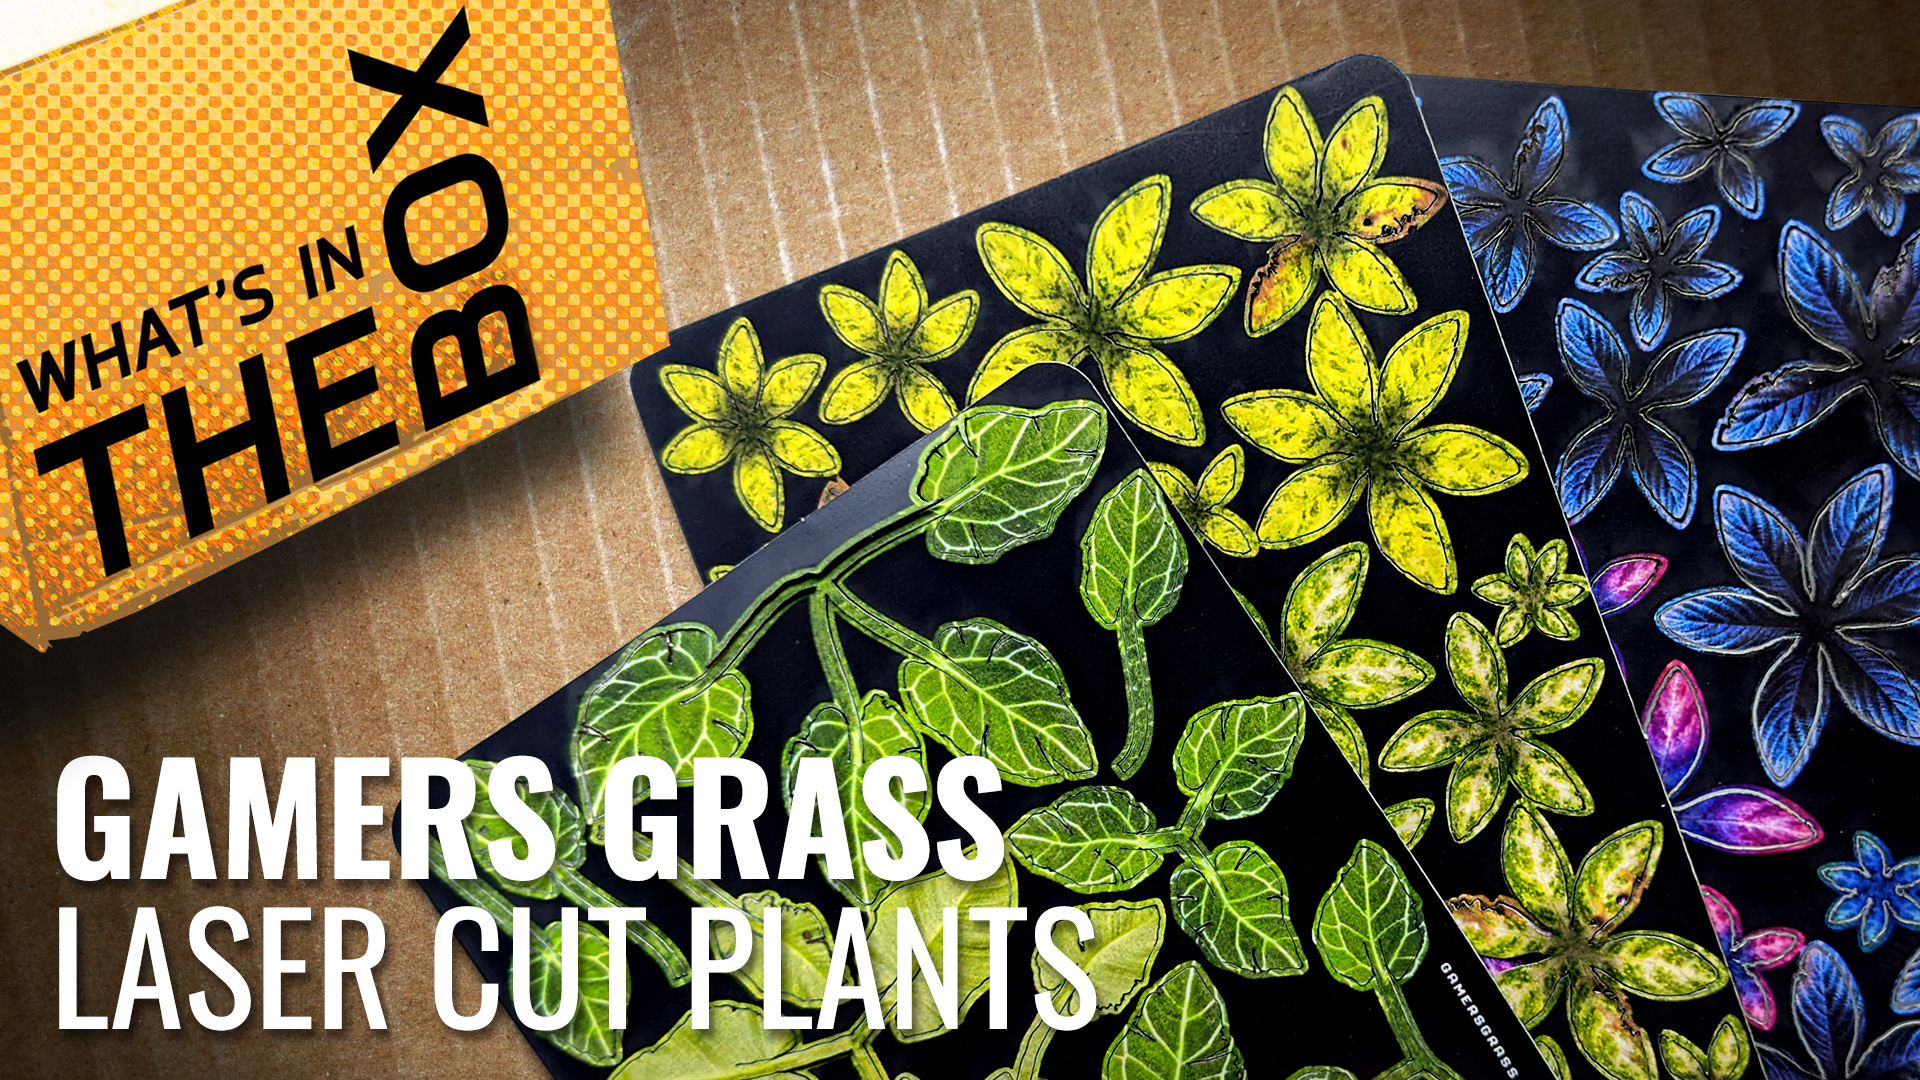 Unboxing-Gamers-Grass_Laser-Cut-Plants-coverimage